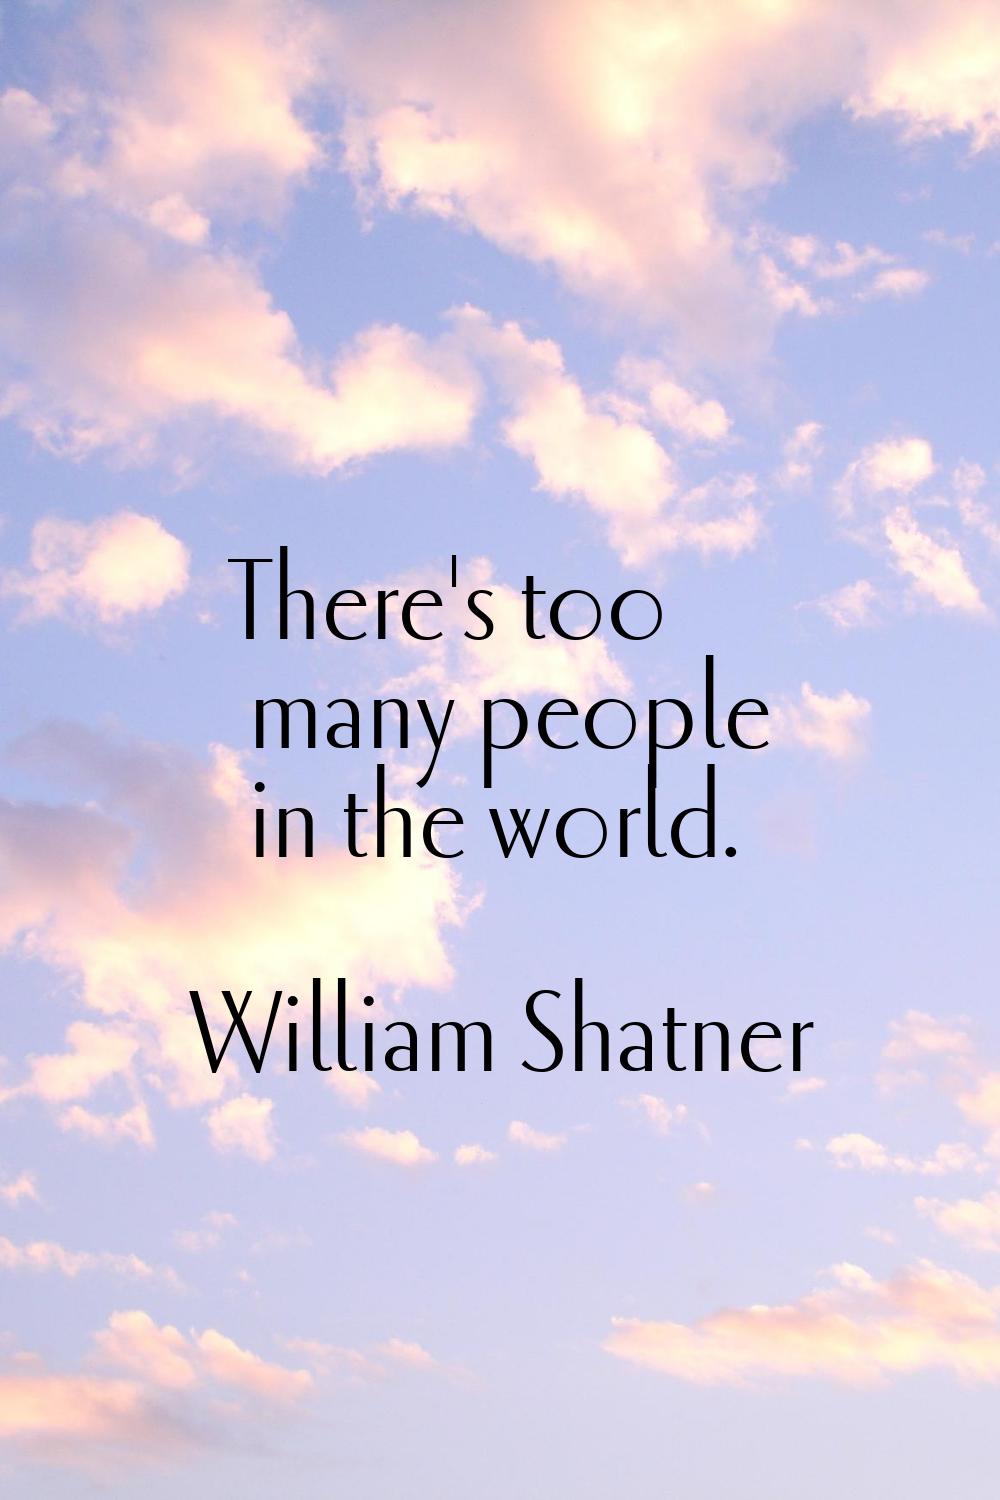 There's too many people in the world.